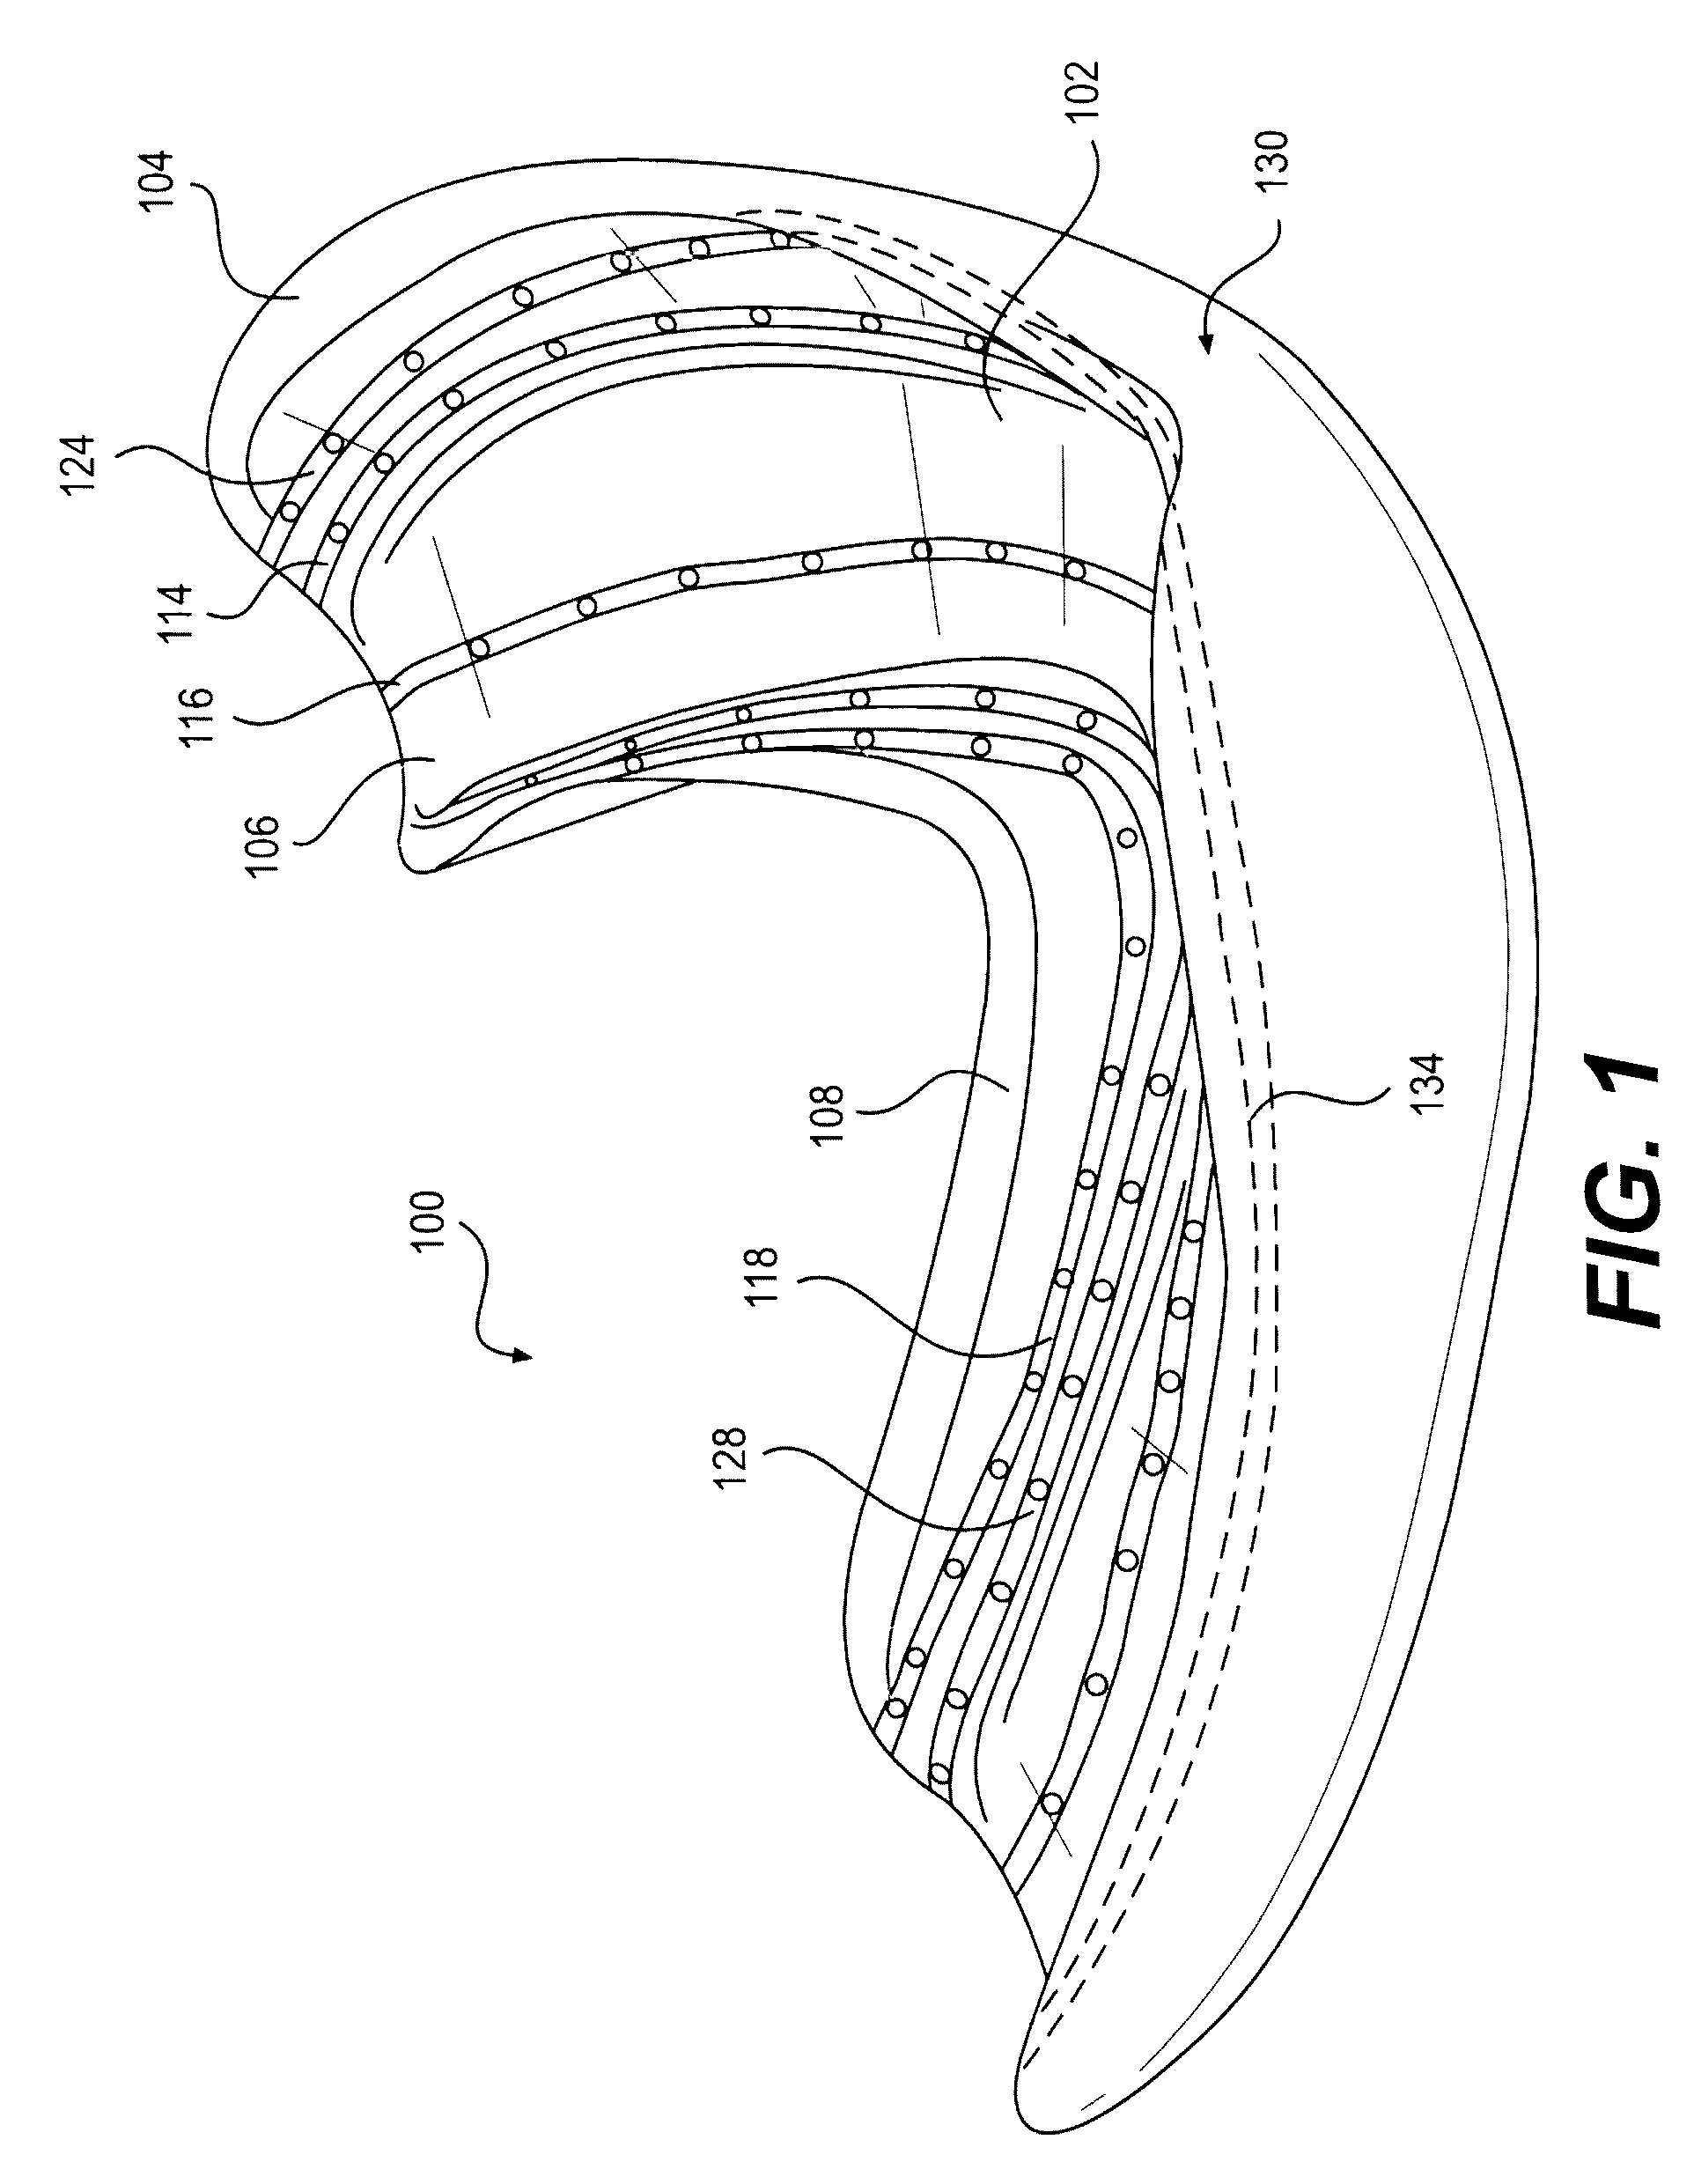 Apparatus and system for oxidative therapy in dentistry